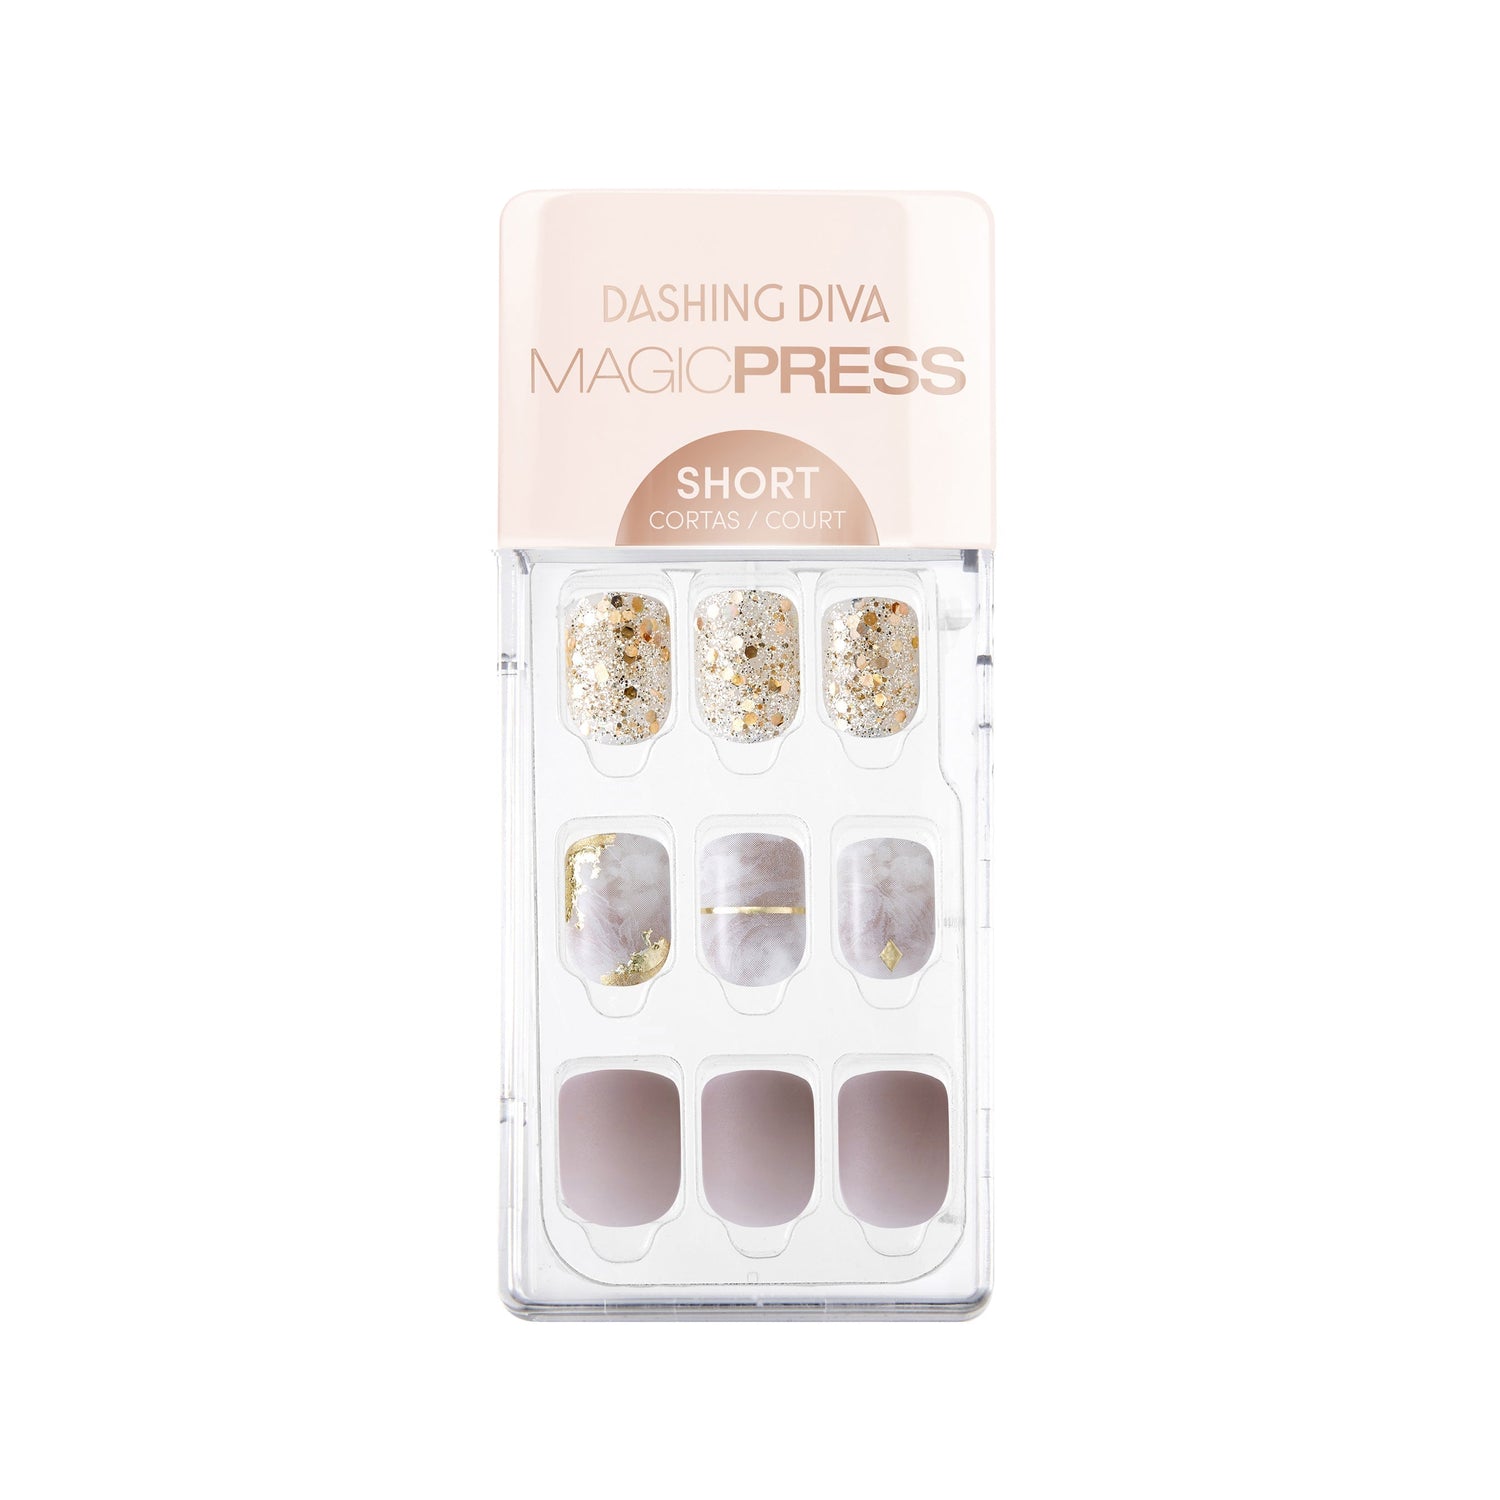 Dashing Diva MAGIC PRESS short, square neutral nails with gold foil and chunky confetti glitter accents.